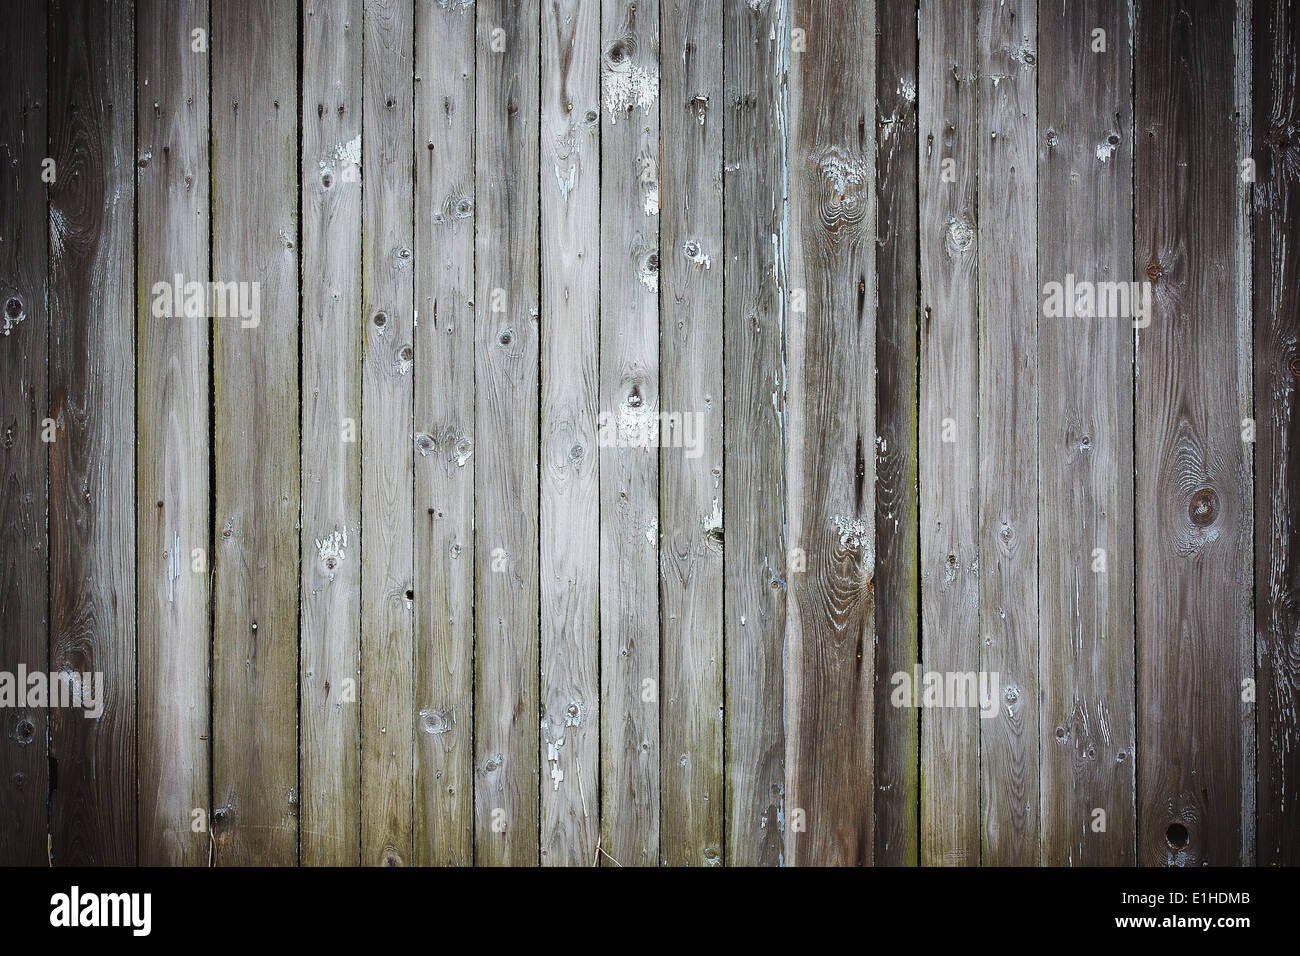 Background of old boards Stock Photo